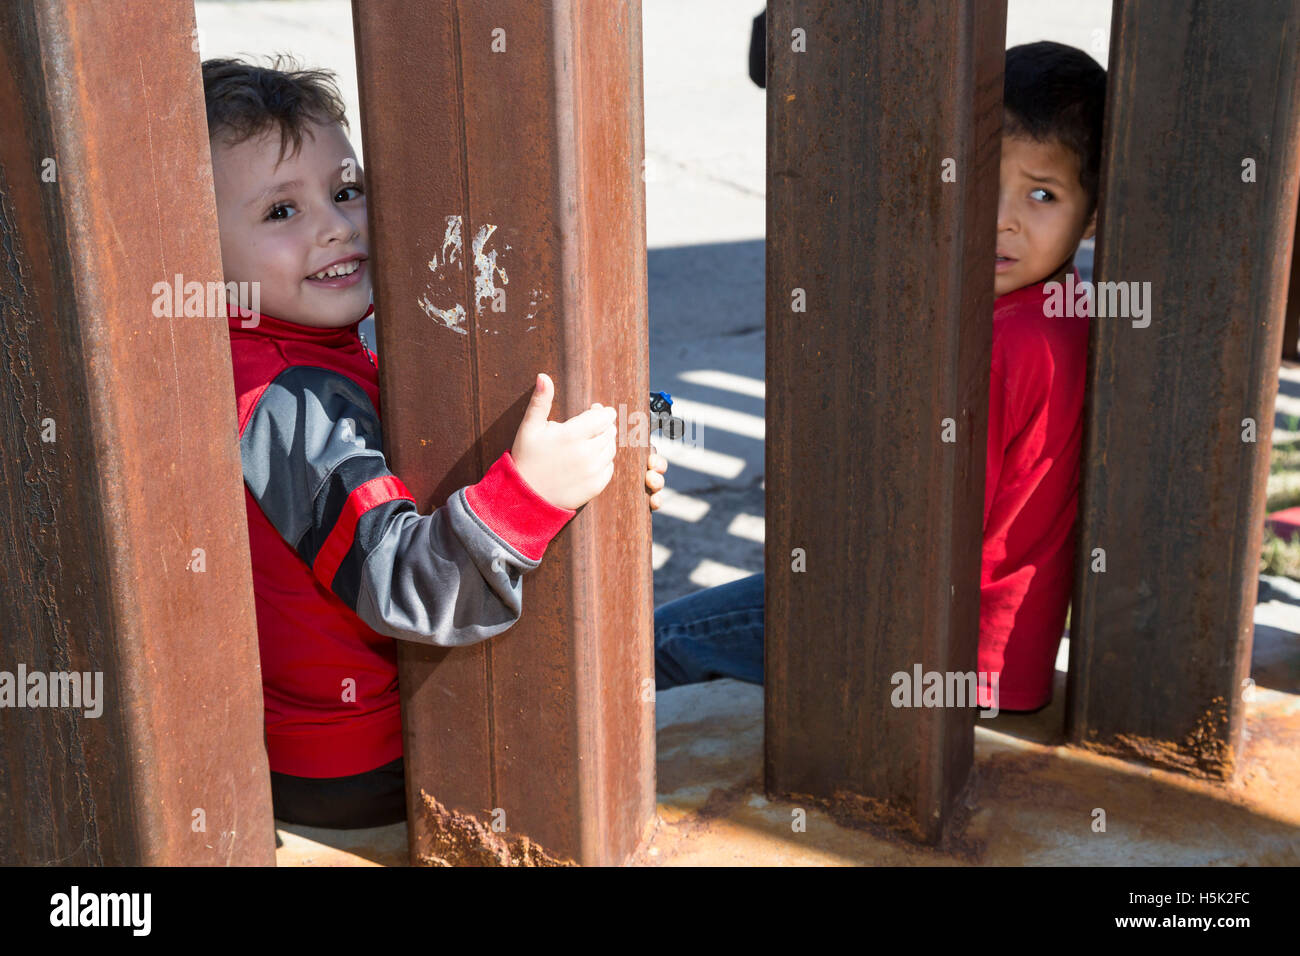 Nogales, Sonora Mexico - Boys on the U.S. side of the U.S.-Mexico border fence, looking into Mexico. Stock Photo